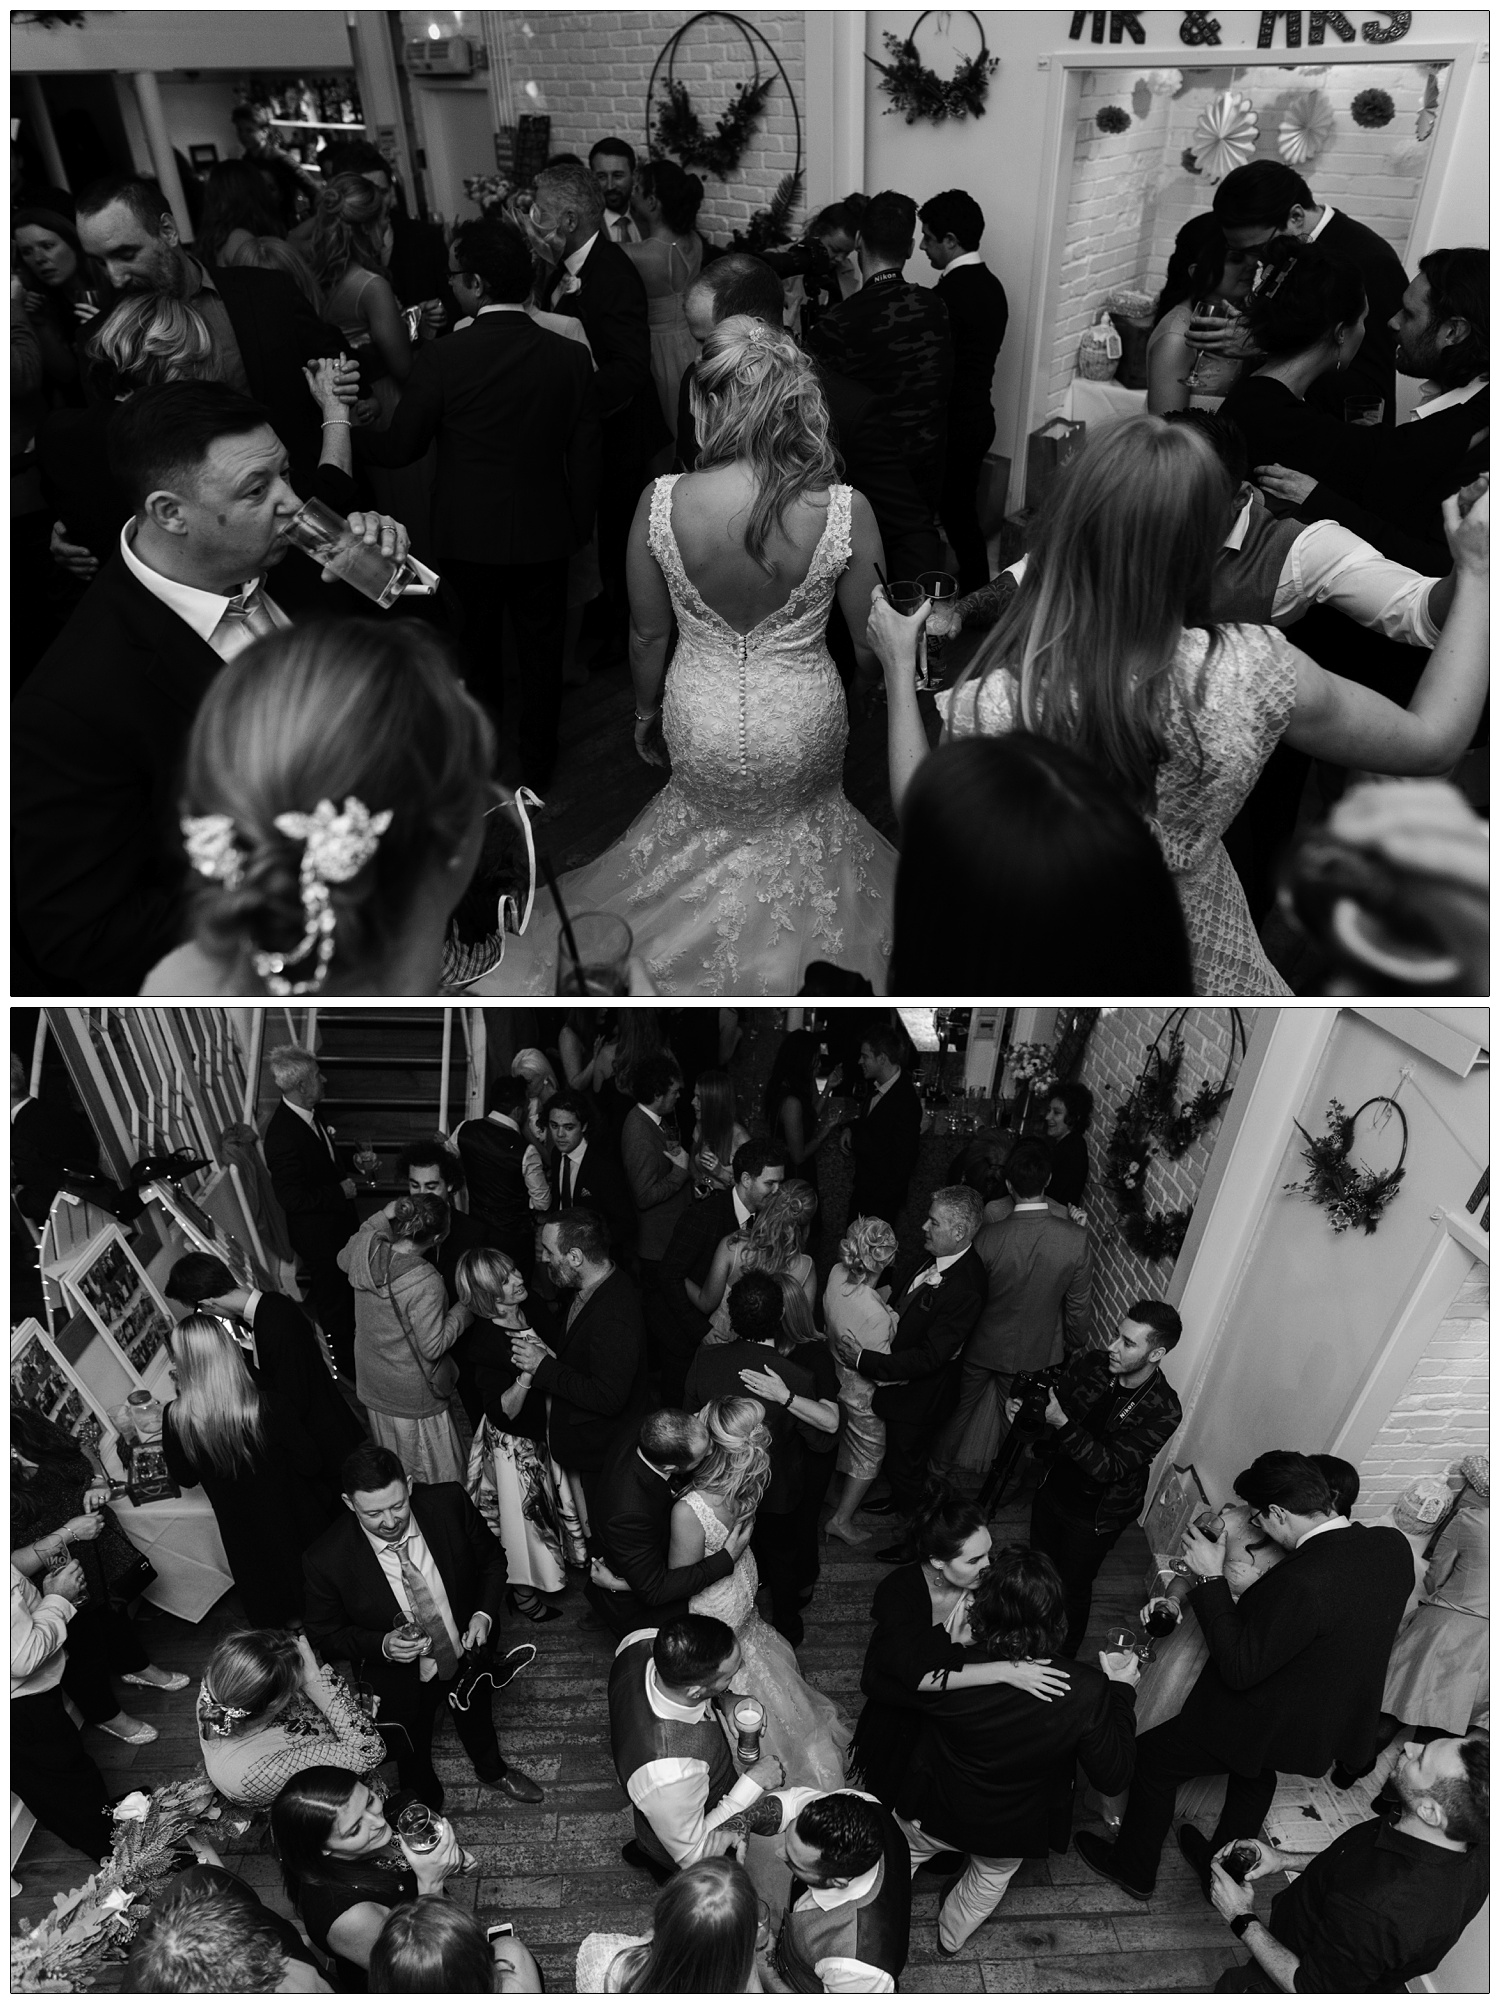 Black and white photograph from above of people dancing at a wedding reception in Rayleigh. The bride and groom are in the middle, surrounded by guests.